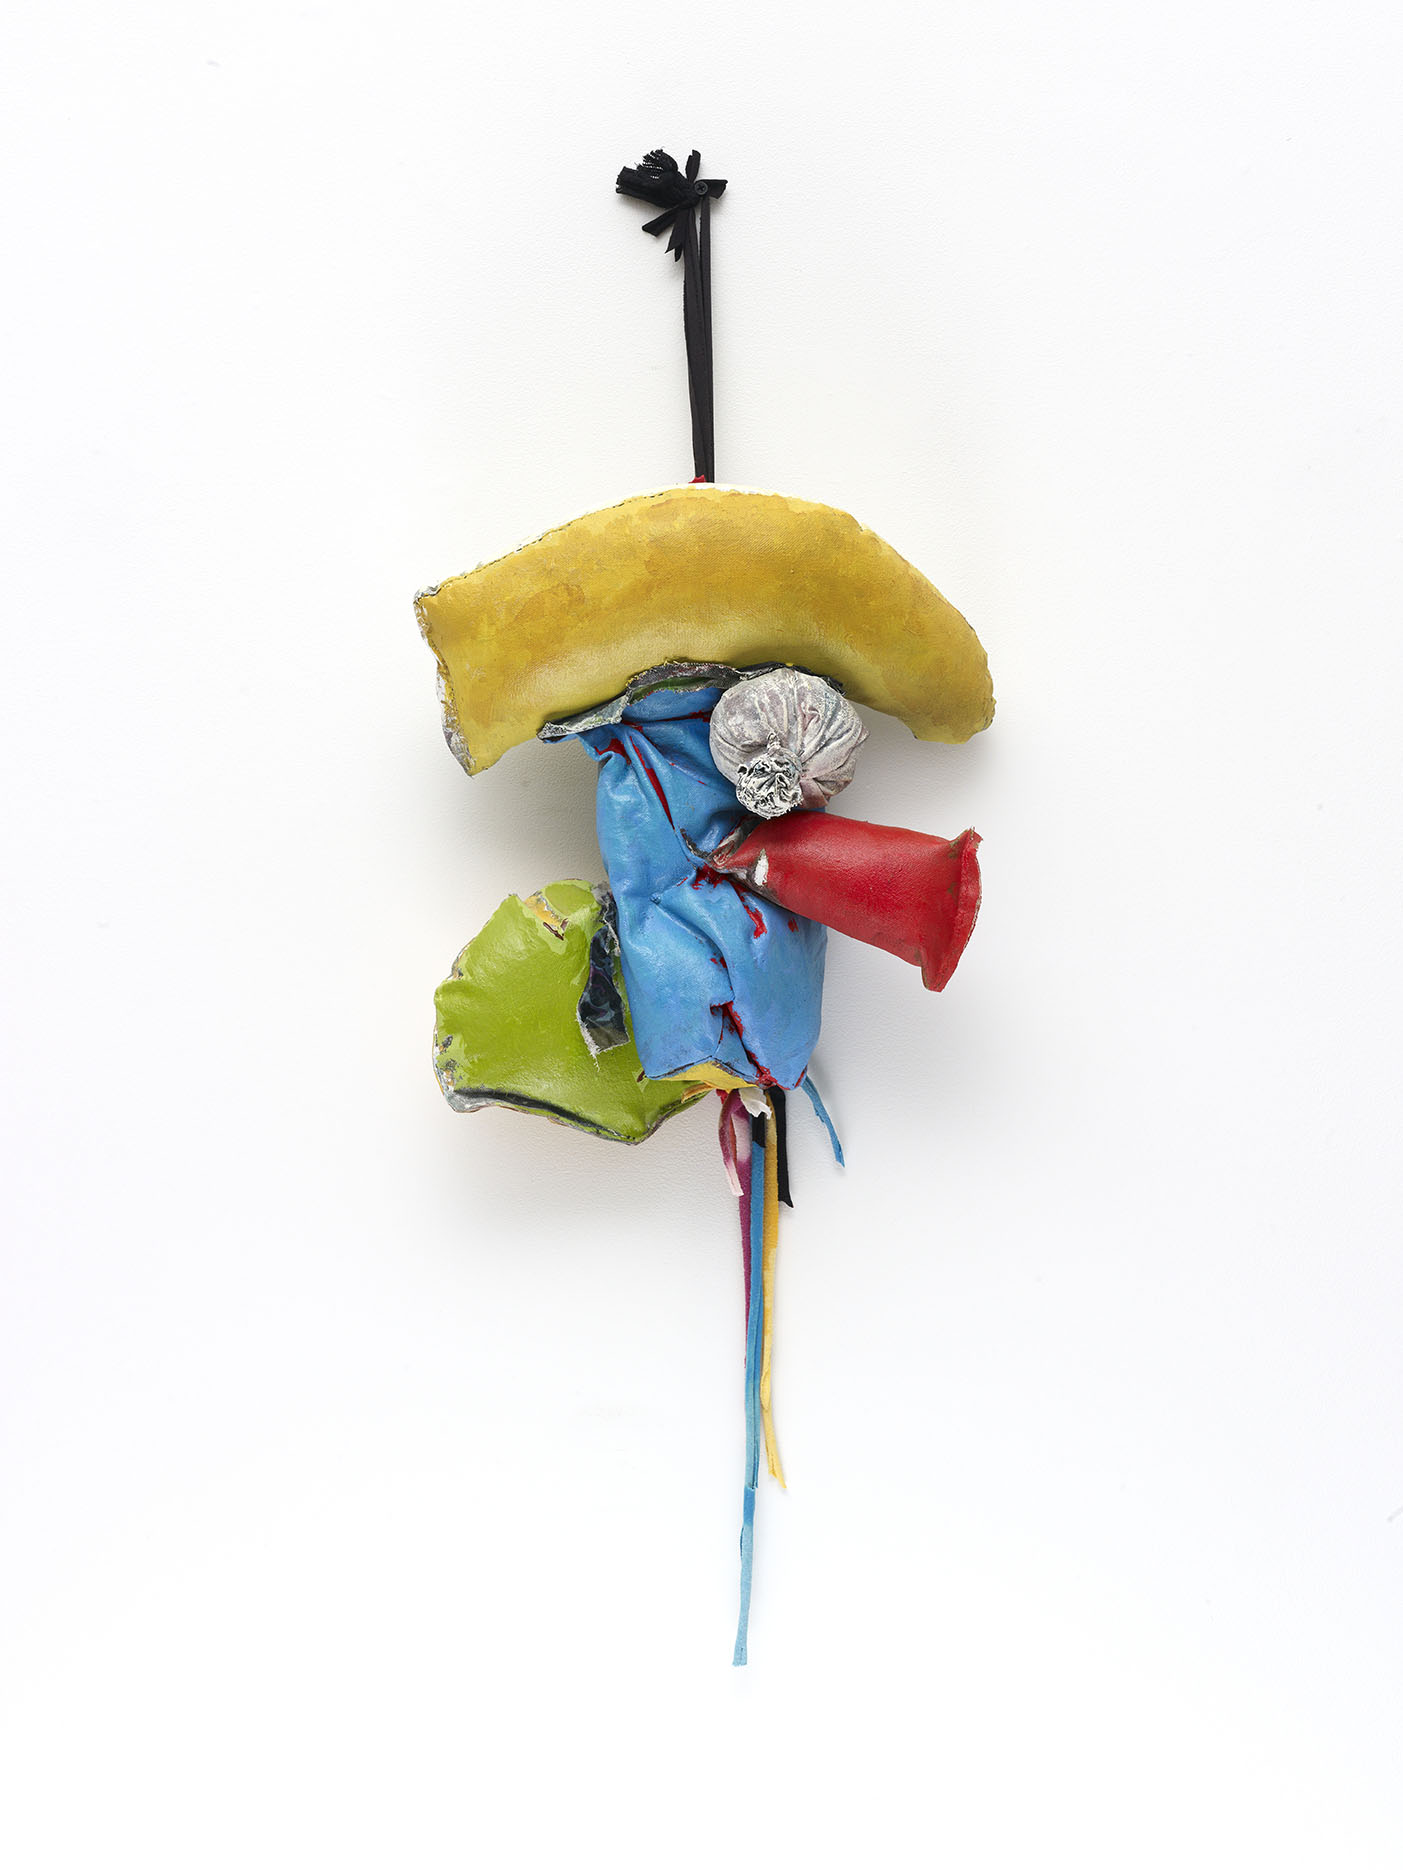 John Outterbridge, Rag and Bag Idiom III, 2012. Mixed media. 34 x 14 x 7 ½ inches. Image courtesy of Tilton Gallery, New York.